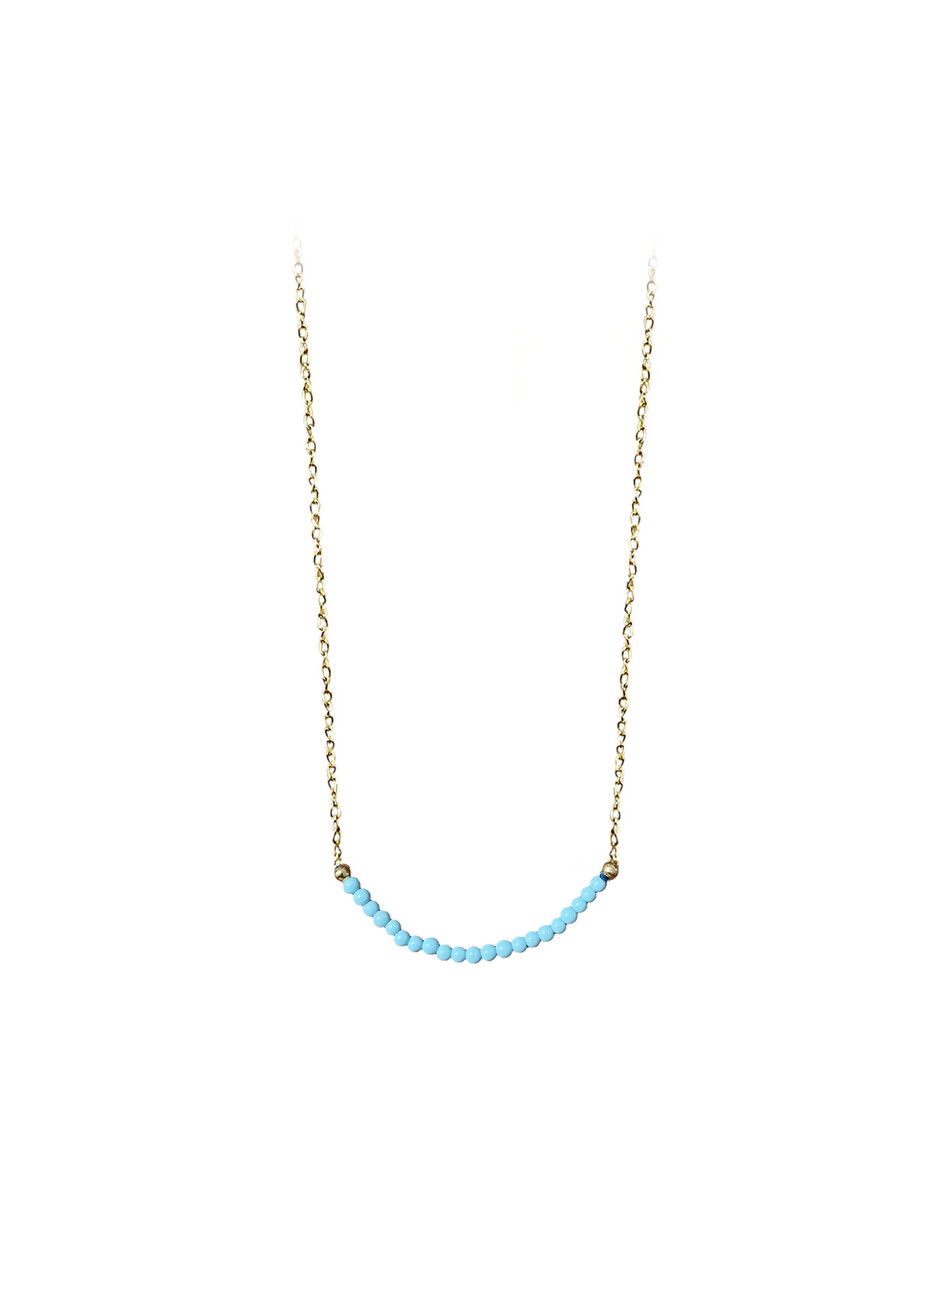 "21 turquoise" necklace in 18kt solid gold